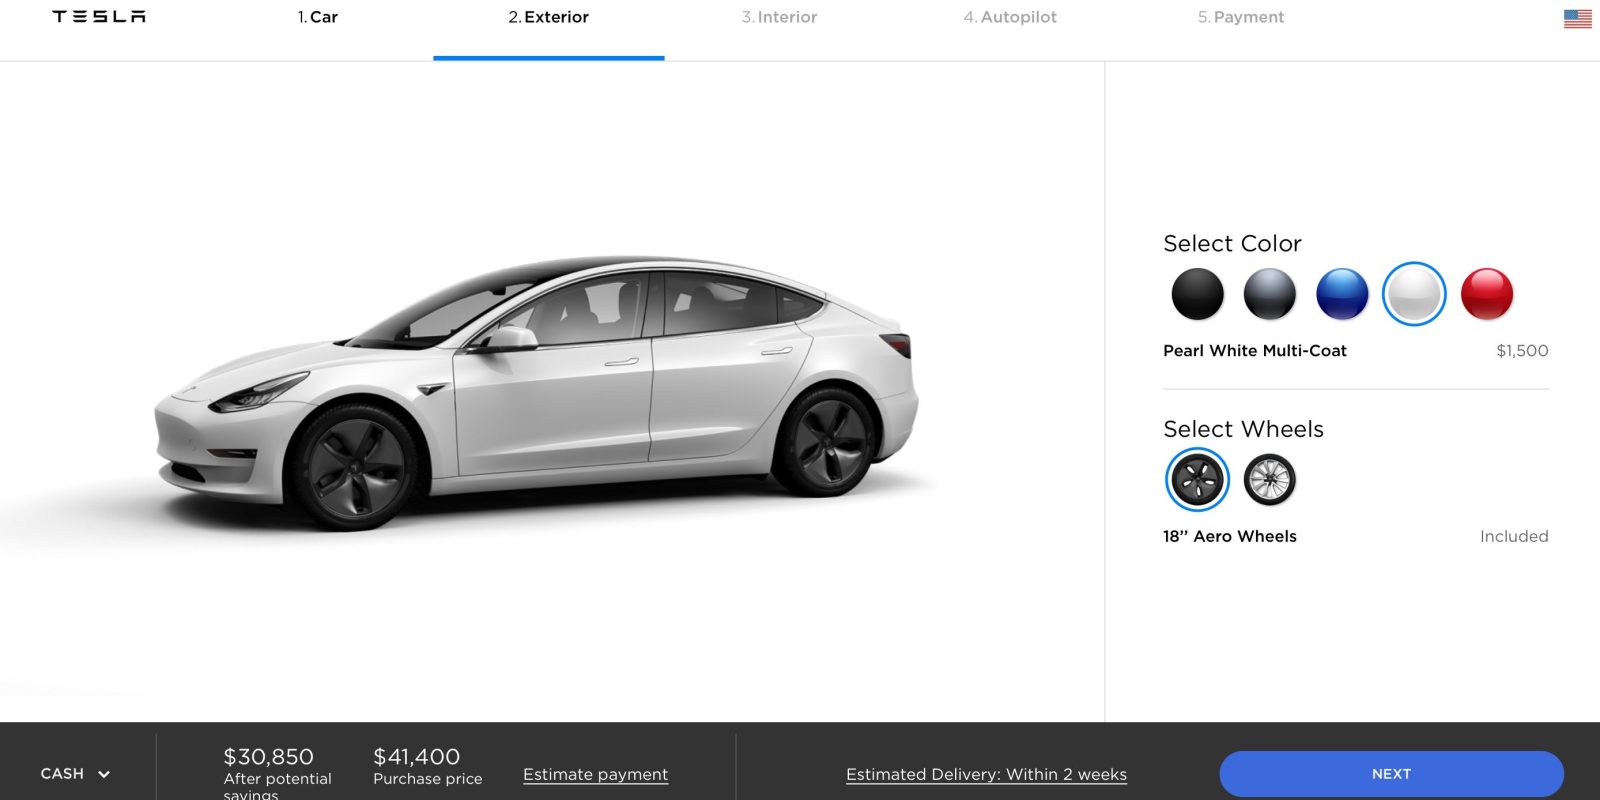 Tesla Changes Its Standard Paint Color From Black To White